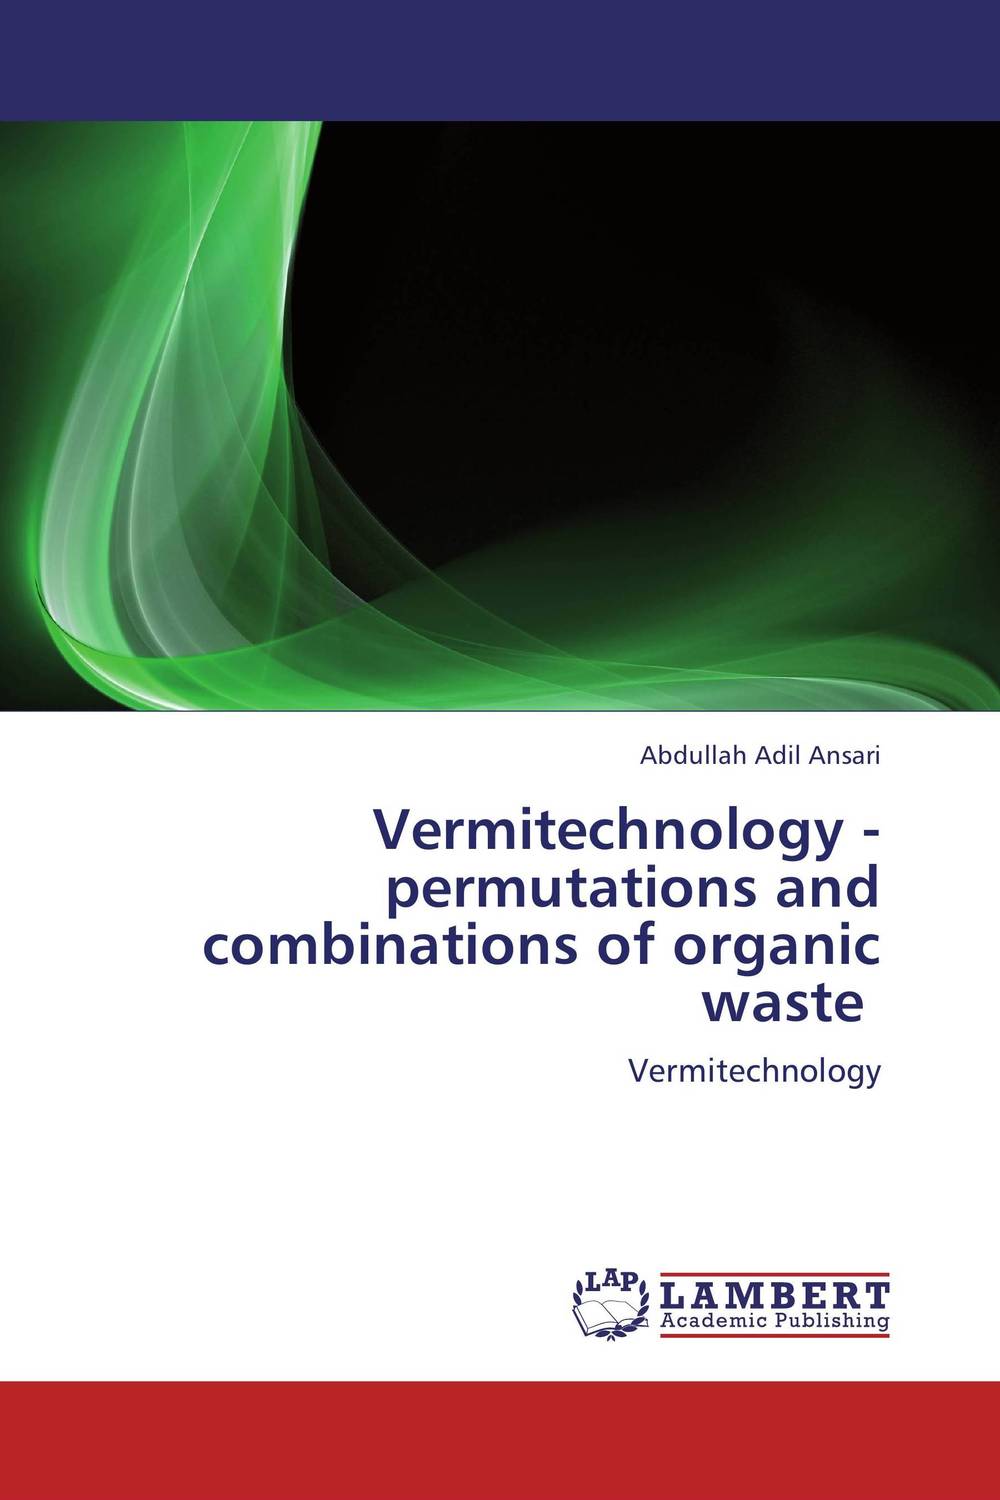 Vermitechnology -permutations and combinations of organic waste